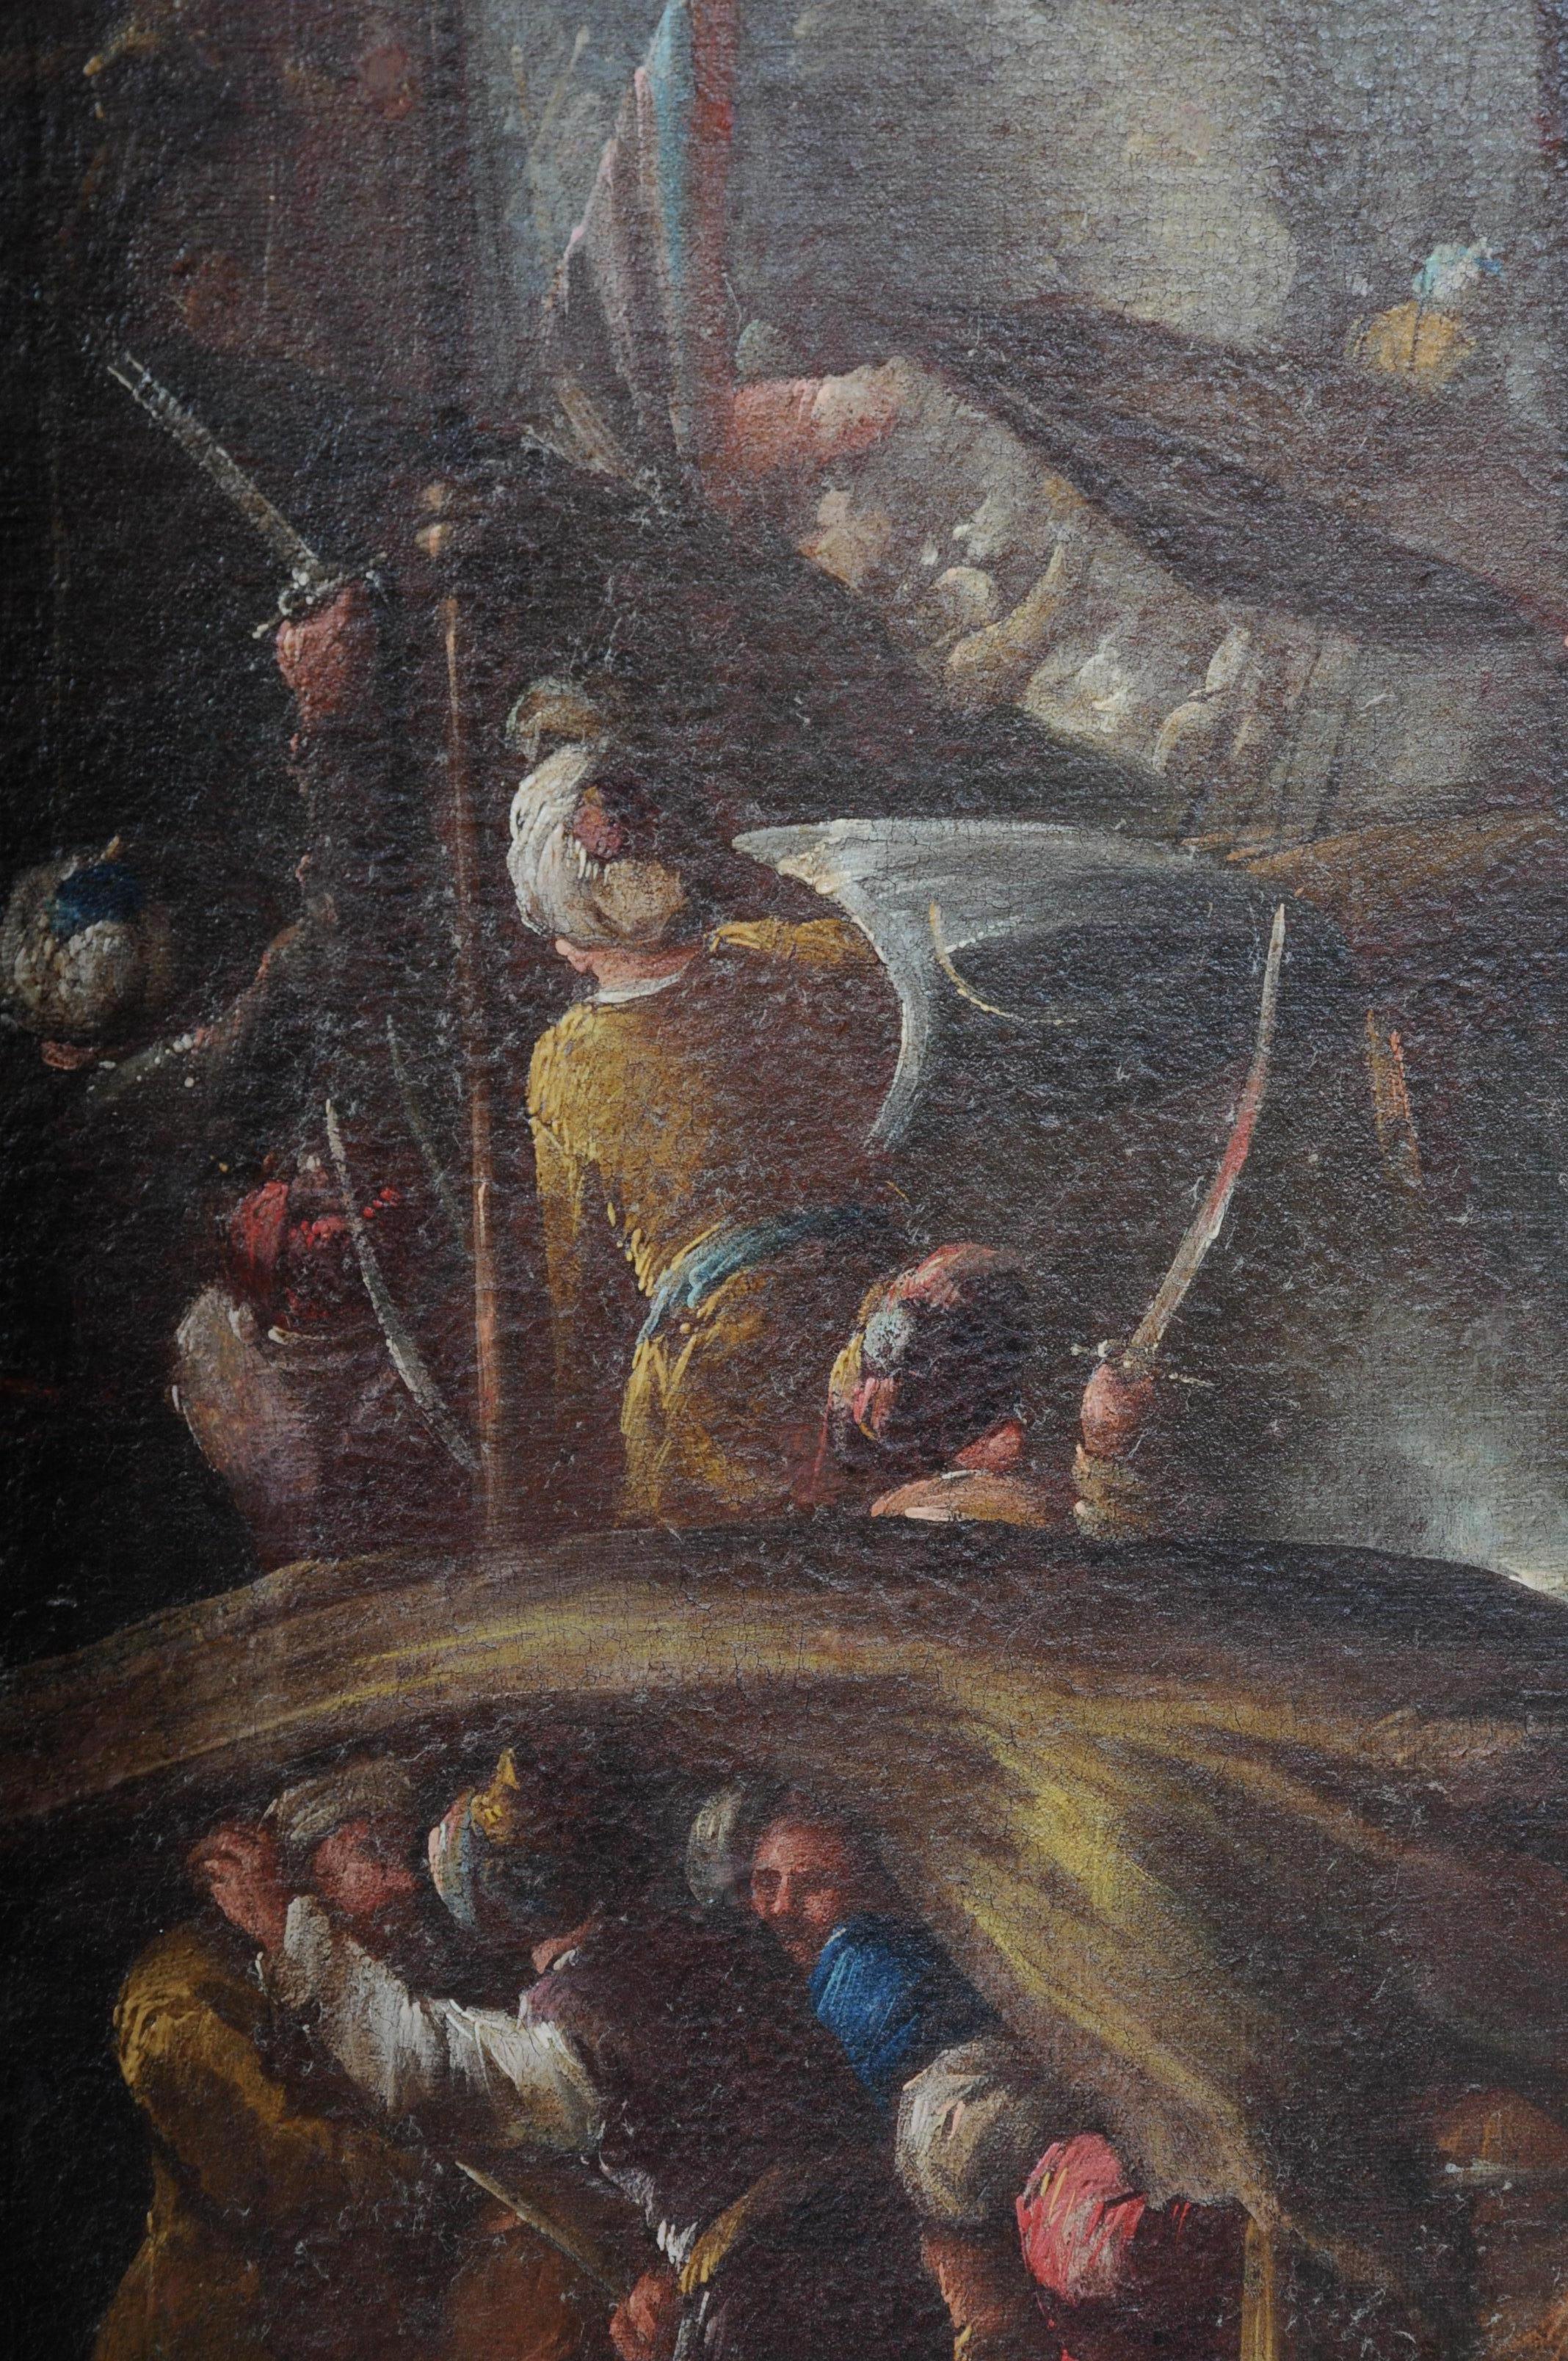 Ottomans Oil Painting Battle Scene from 1740 For Sale 5